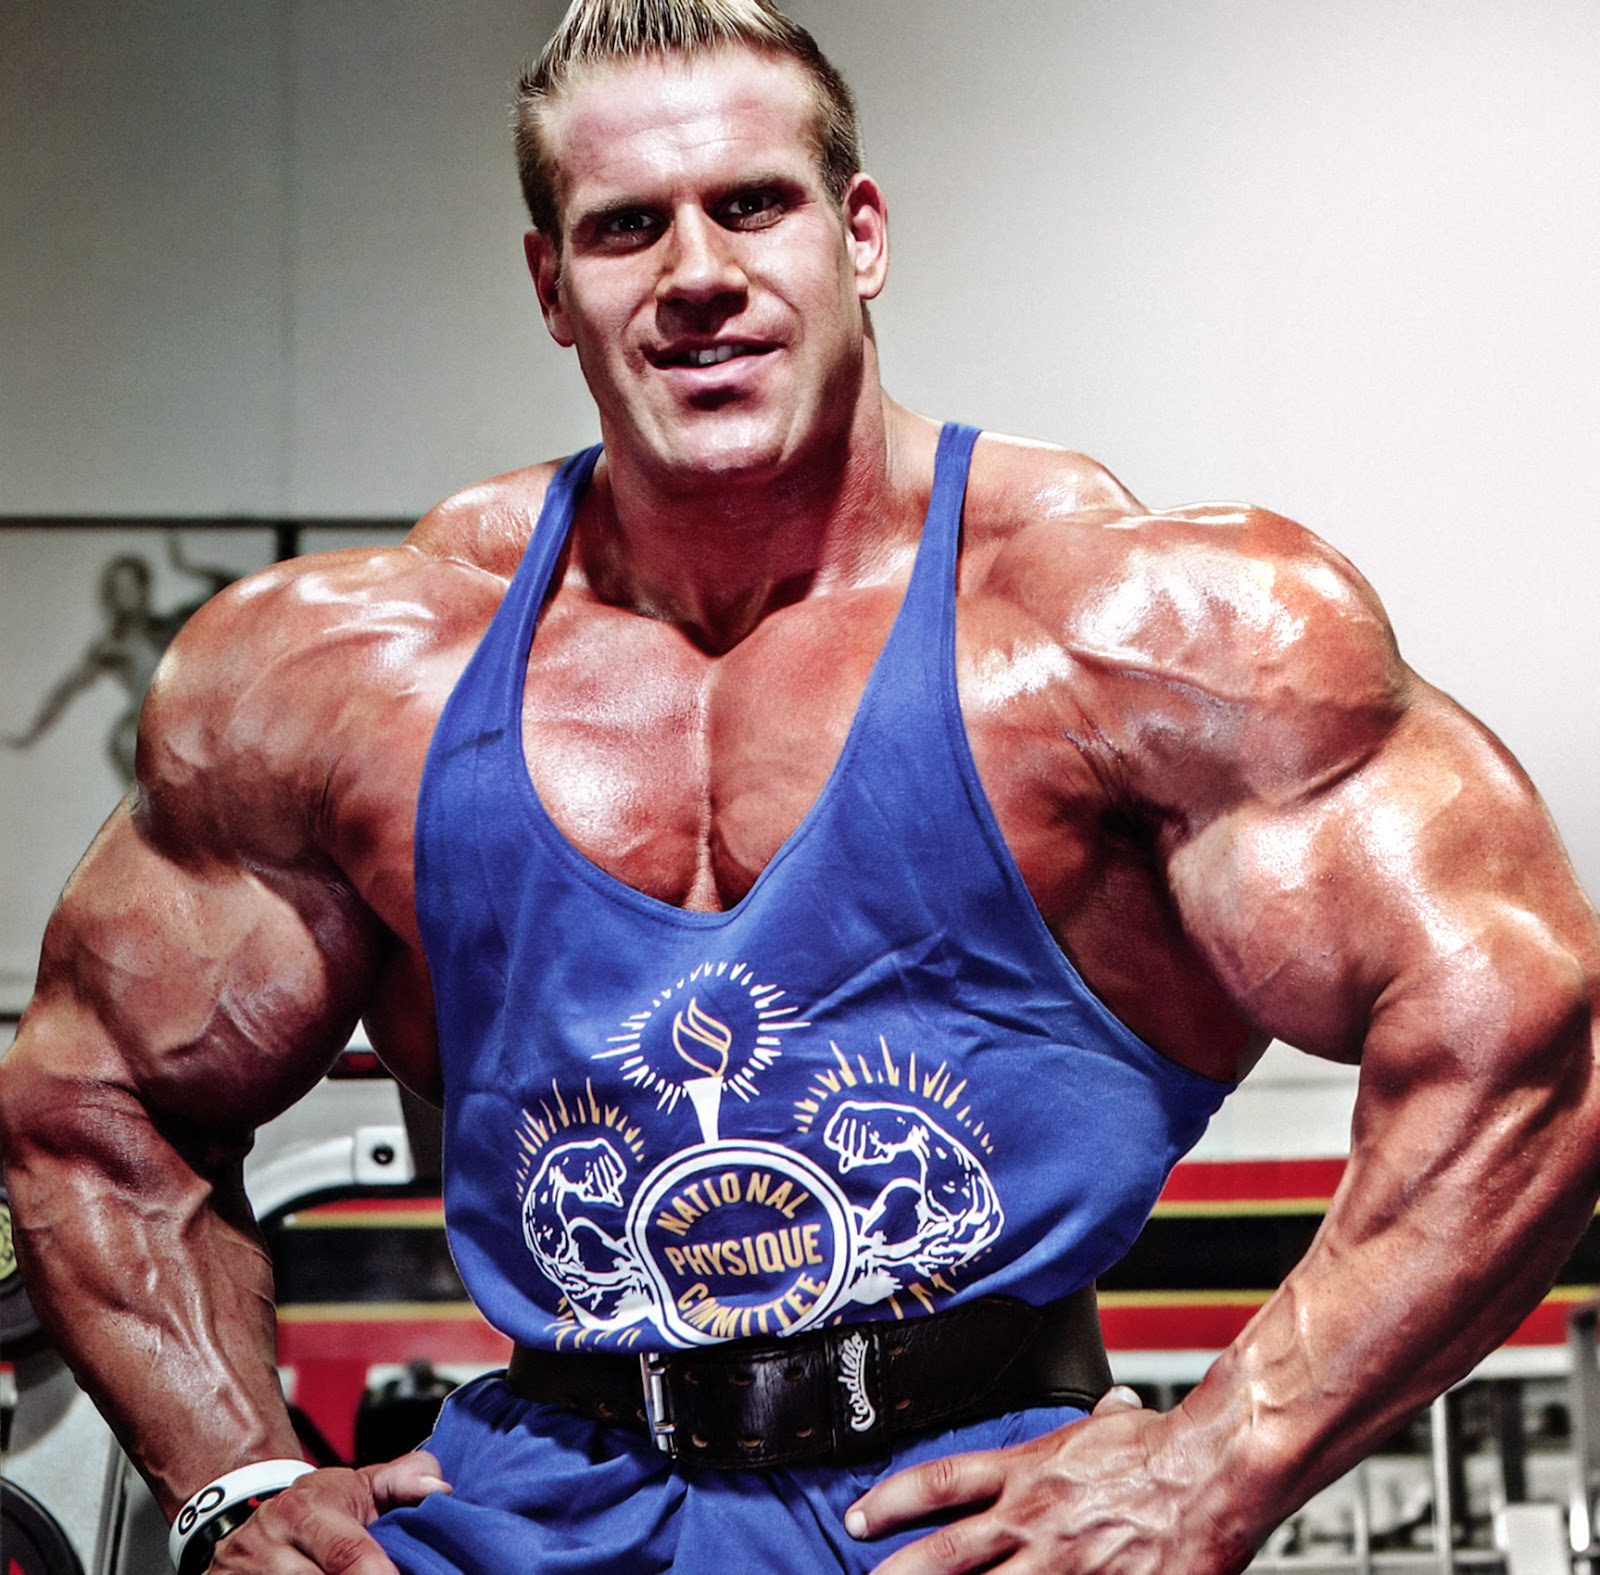 All 100+ Images pictures of jay cutler bodybuilder Latest